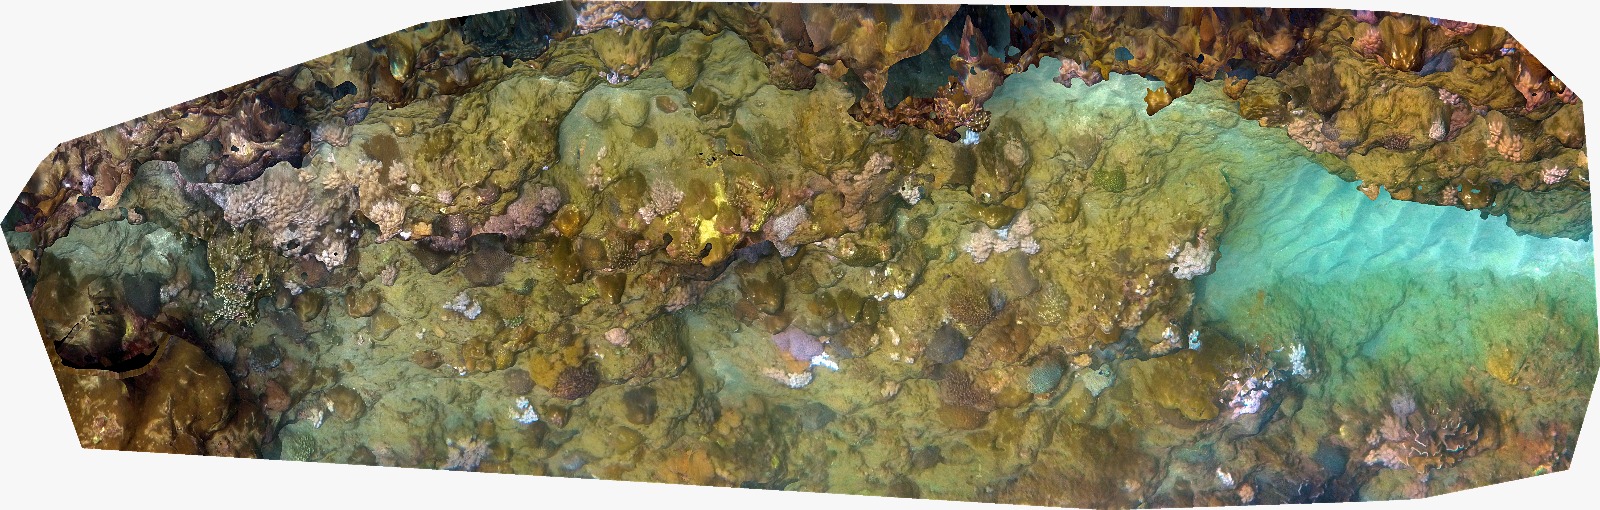 PHOTO OF CORAL MAPPING